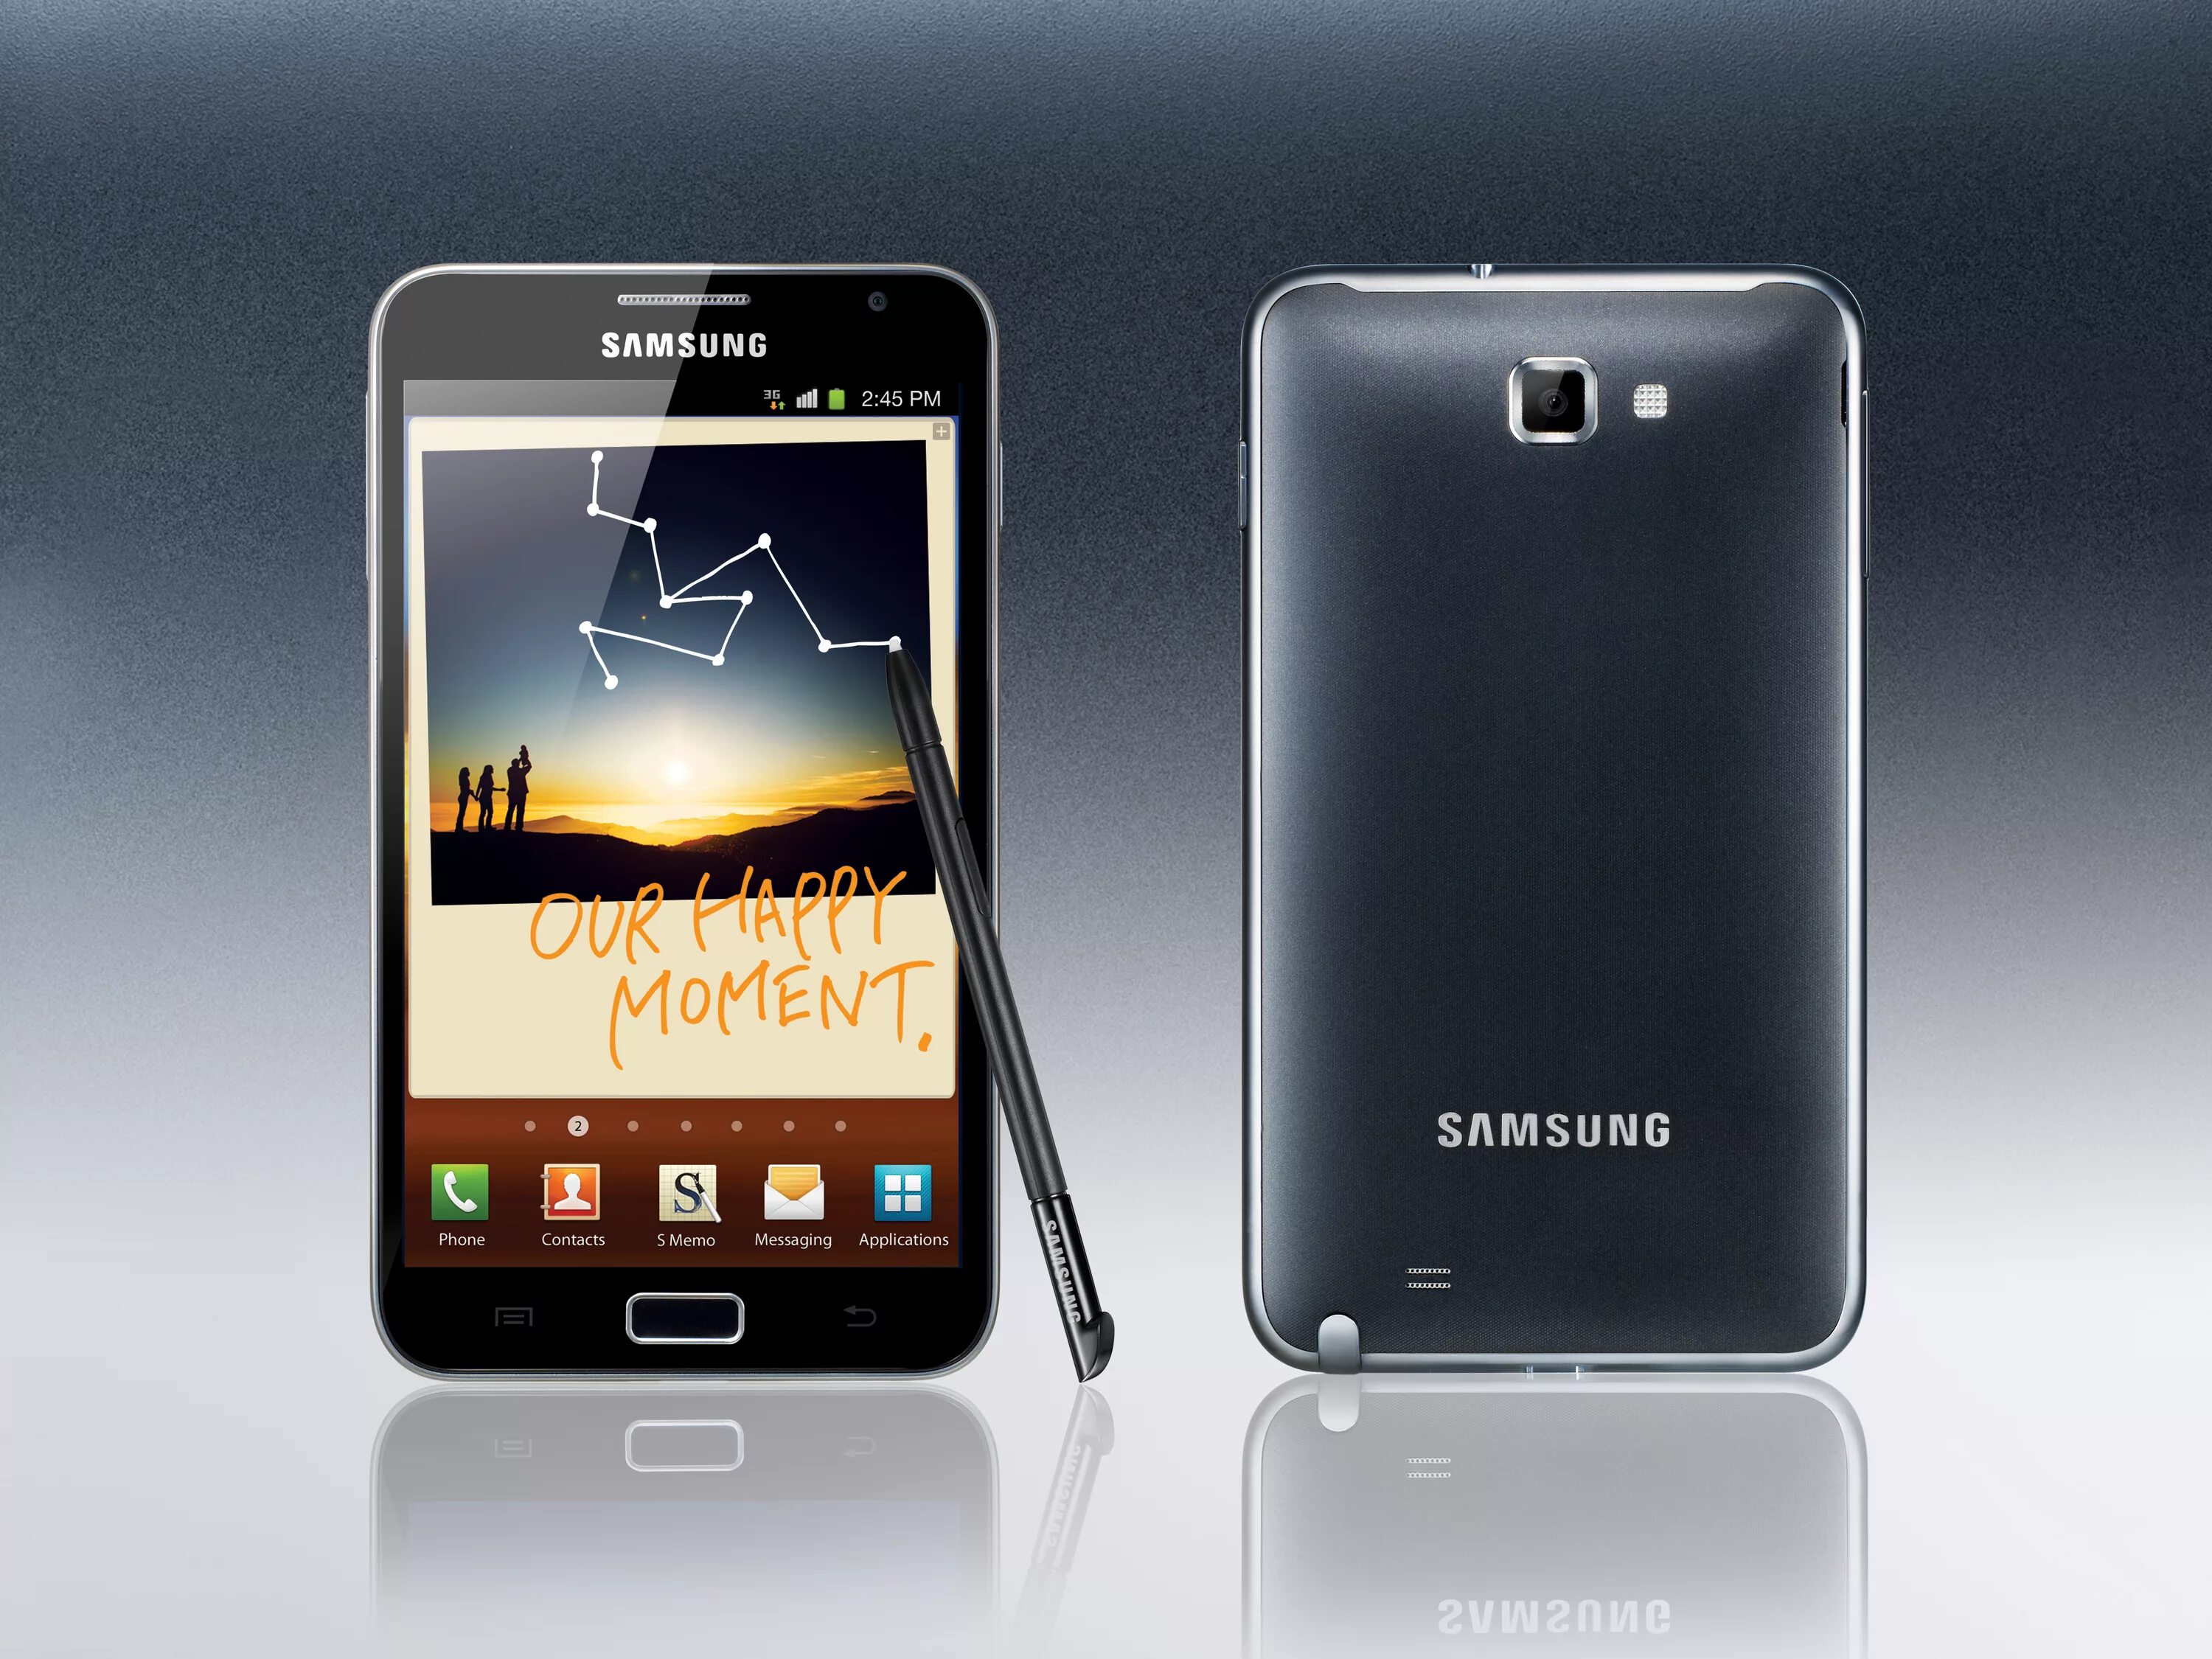 Galaxy note gt. Samsung Galaxy Note 1. Samsung Galaxy Note n7000. Samsung Galaxy Note gt-n7000. Samsung Galaxy Note 2011.